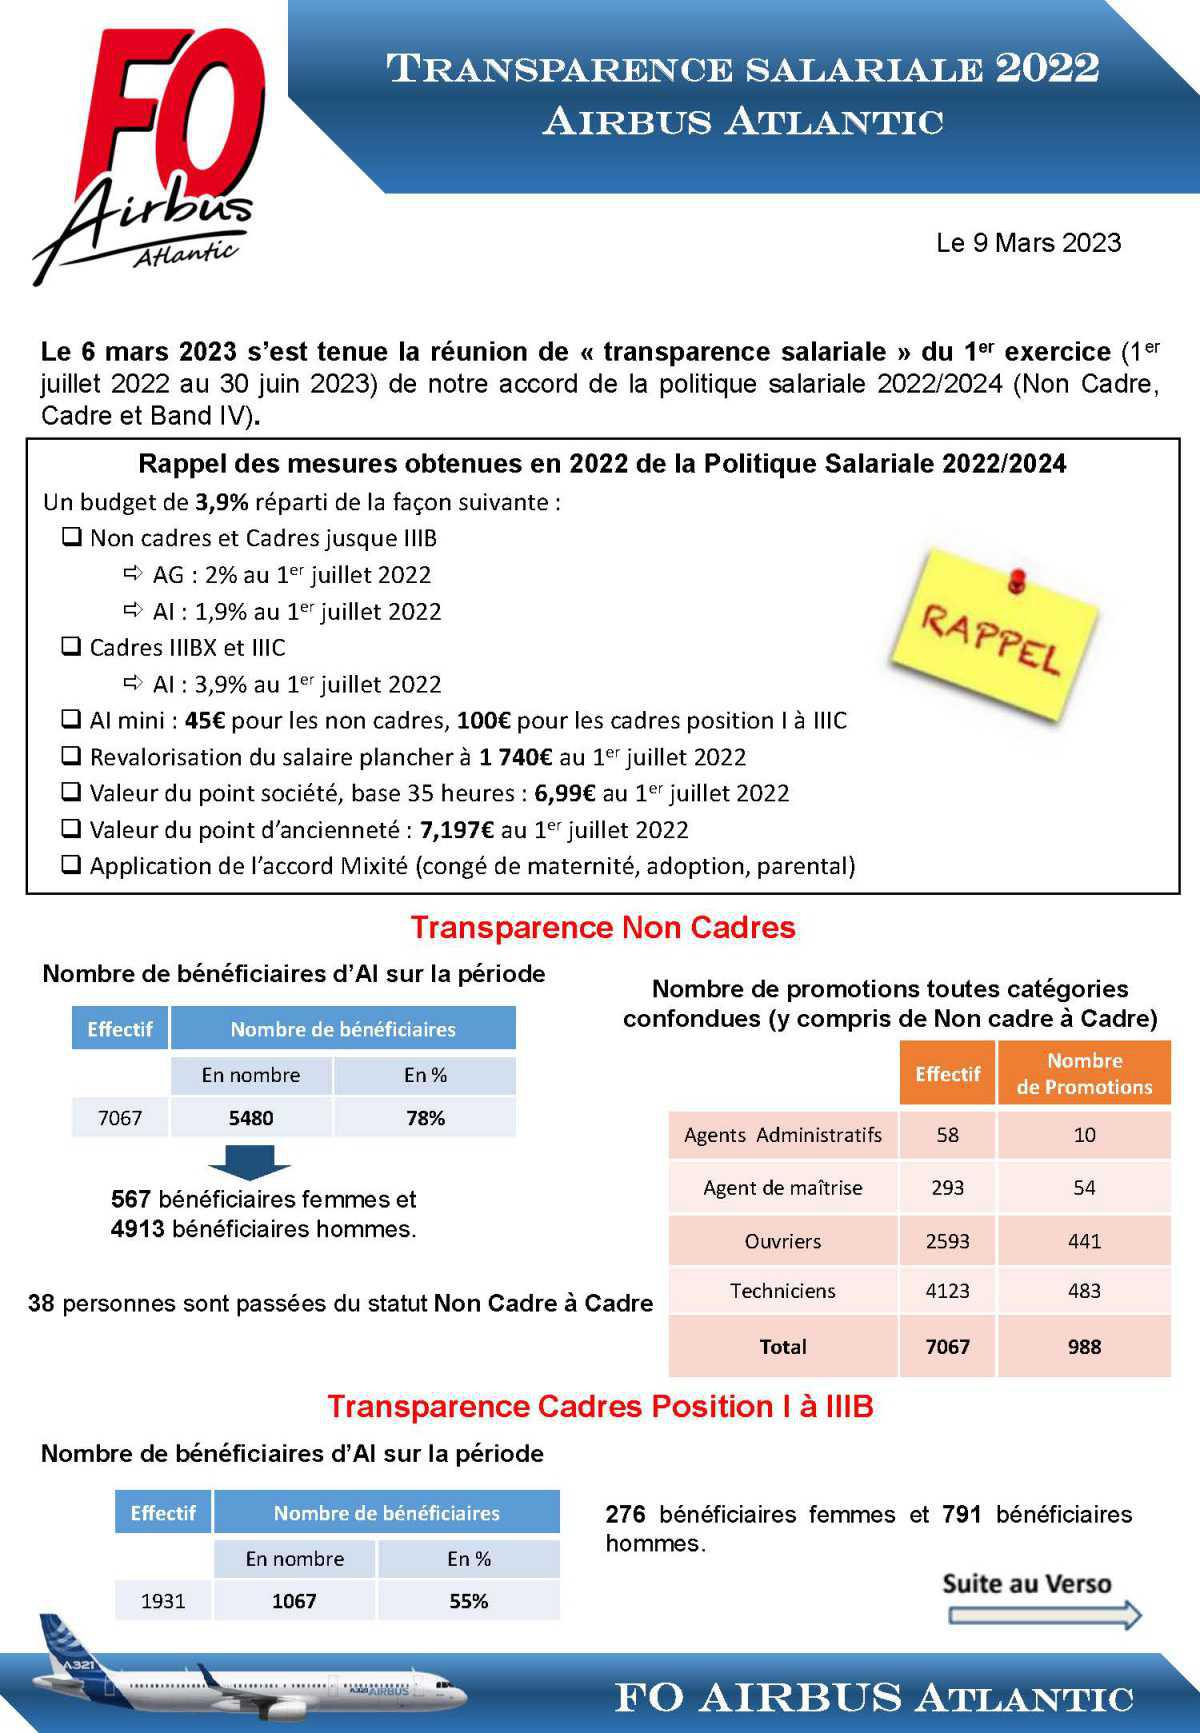 Transparence salariale 2022 